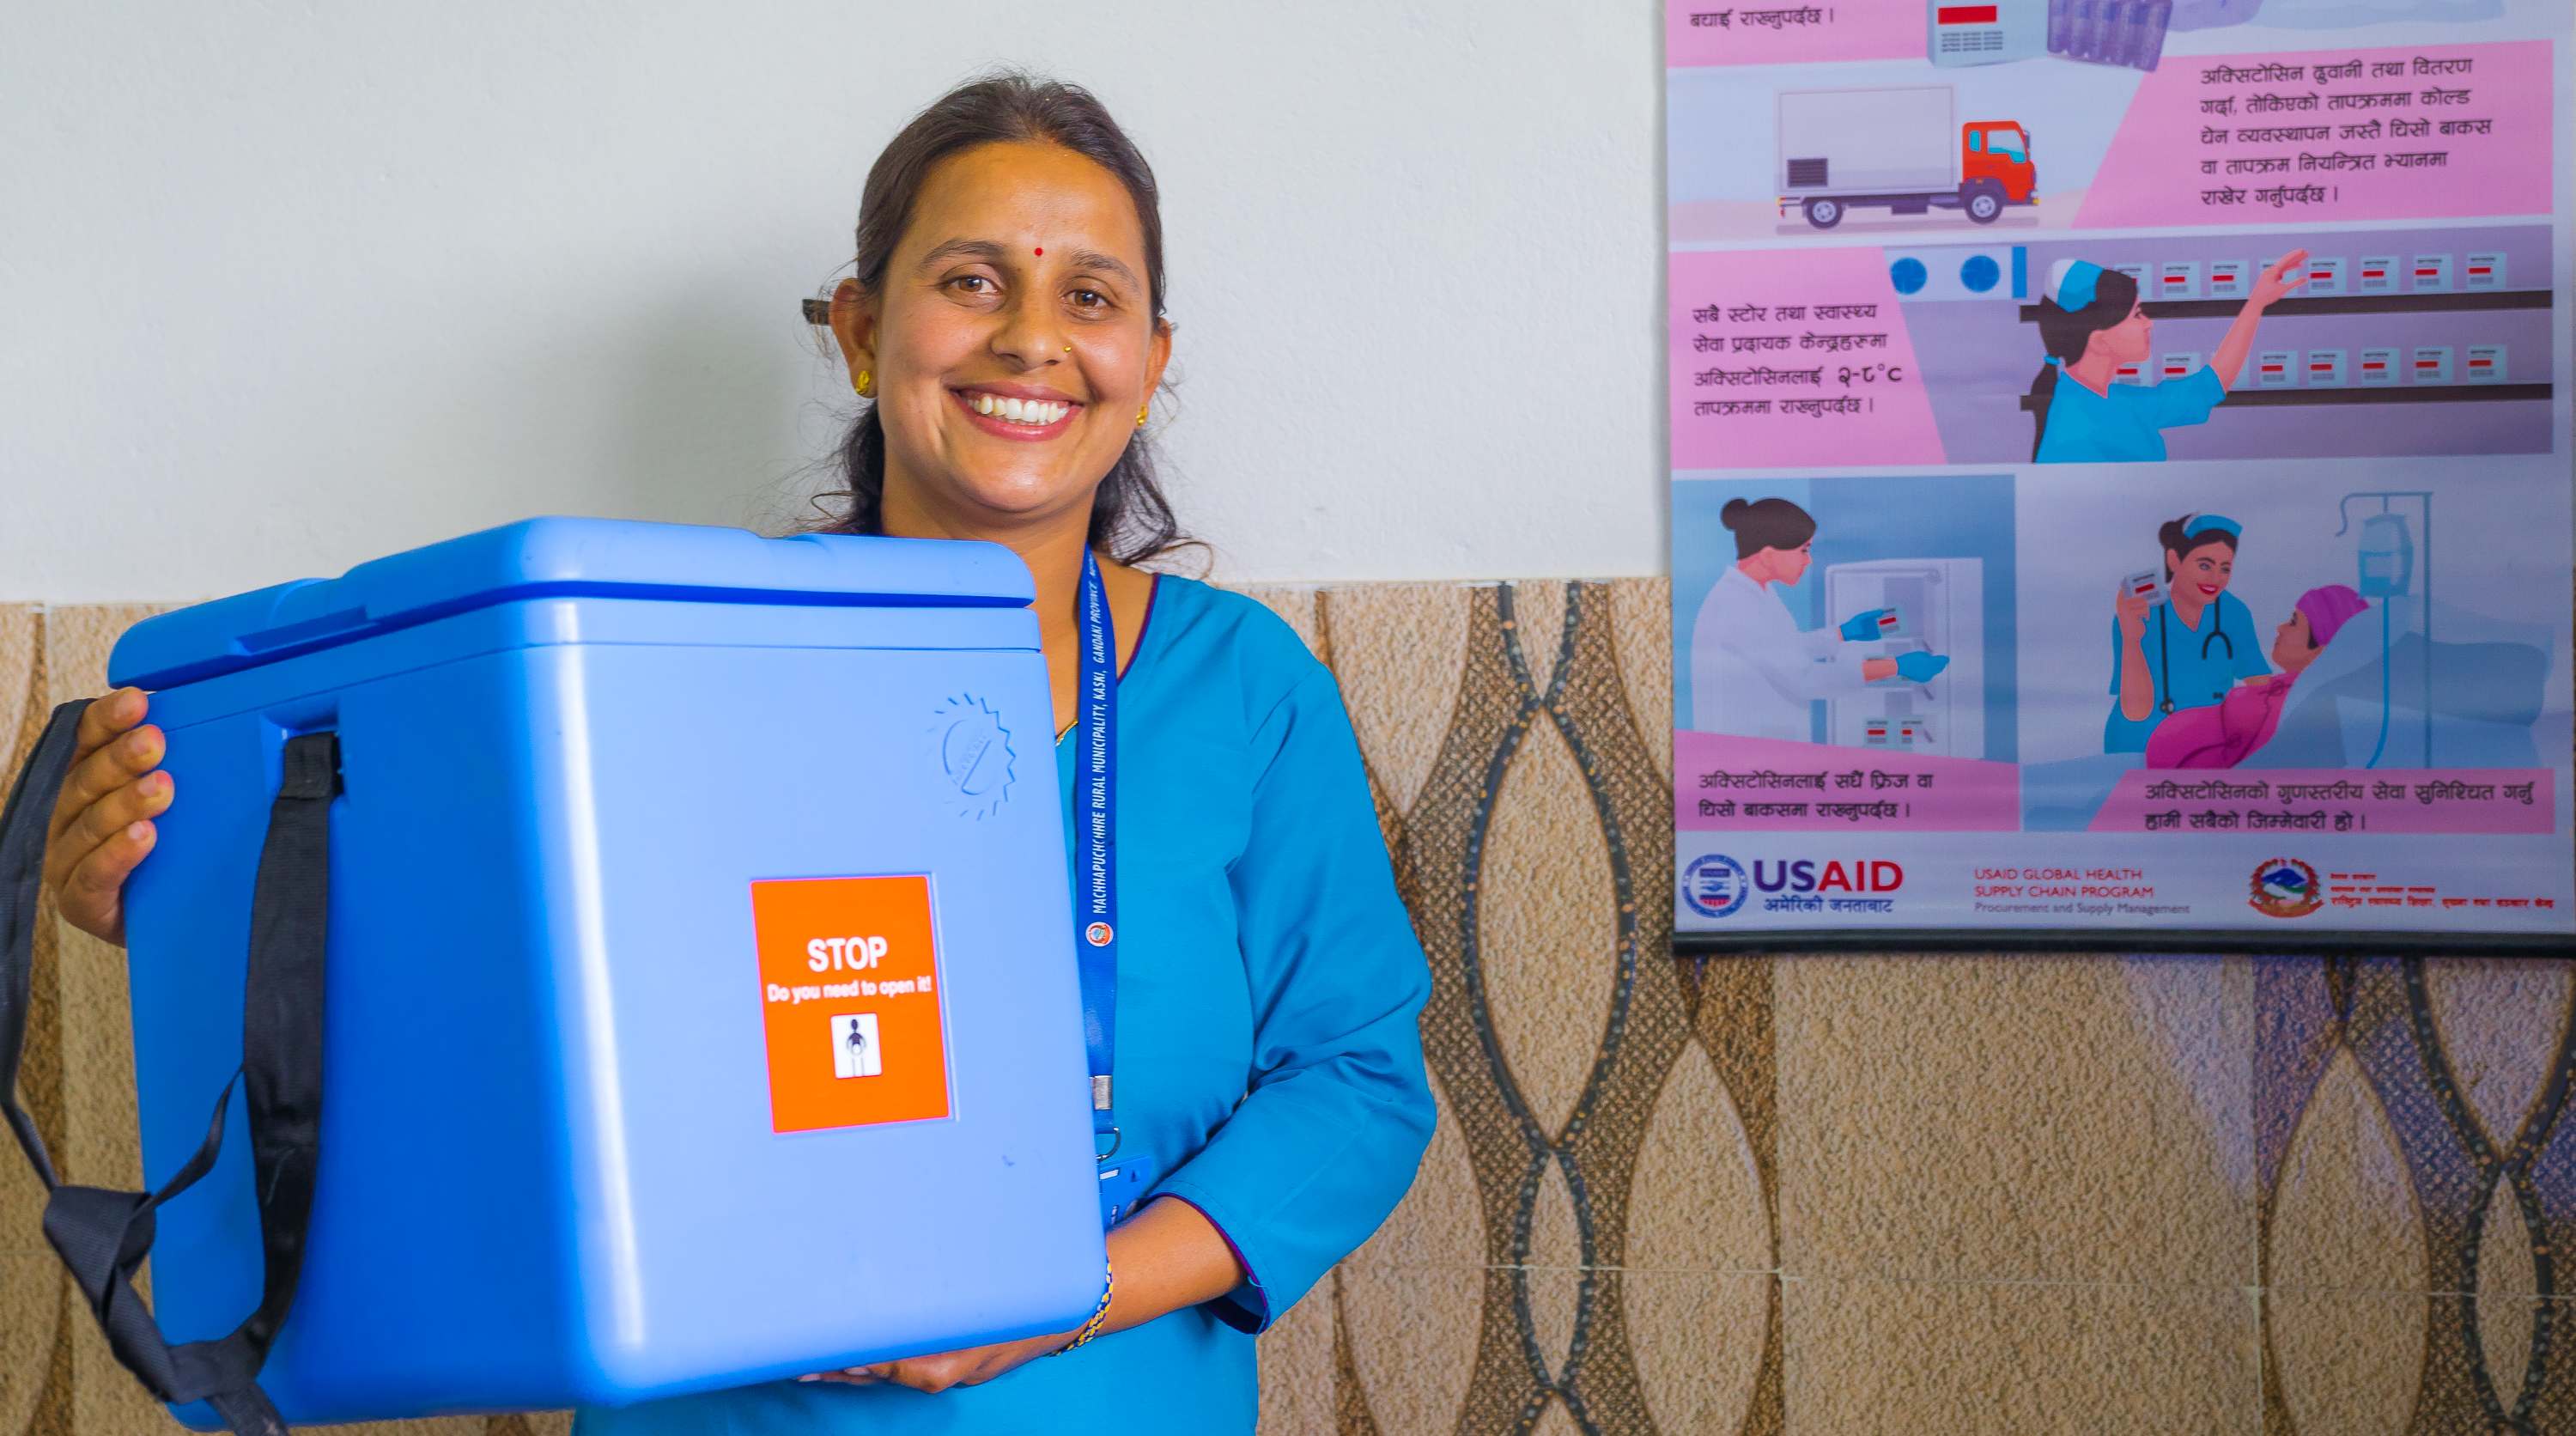 Nepali nurse carries cold box for health supplies near poster about proper oxytocin storage.